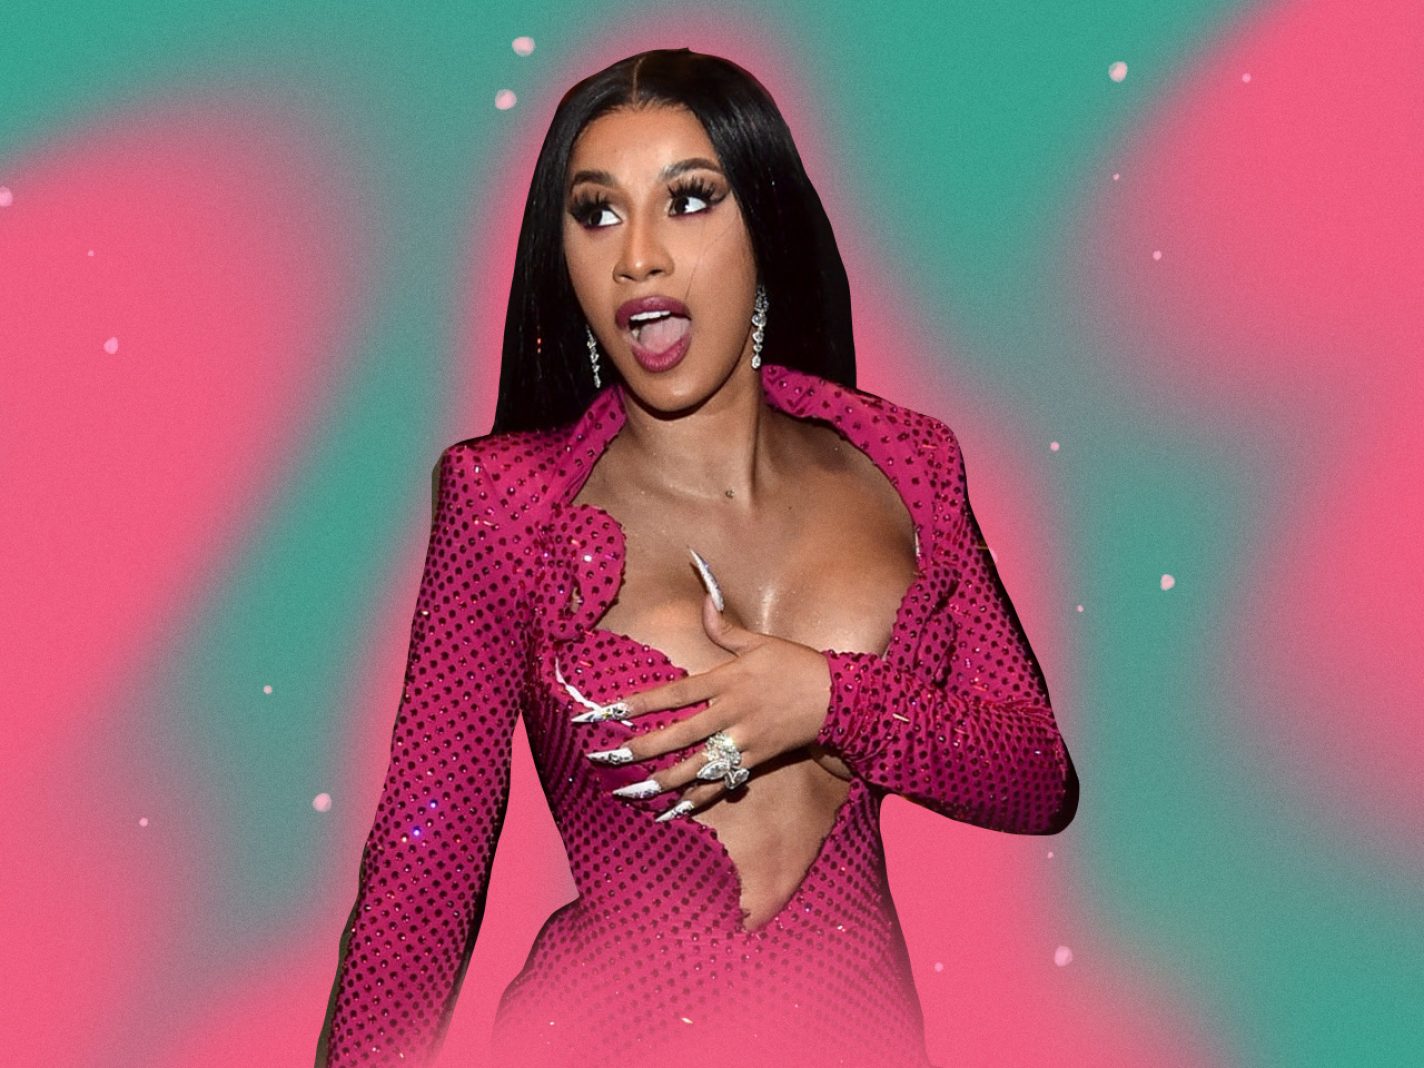 Cardi B accidentally leaks her own nude photo while 